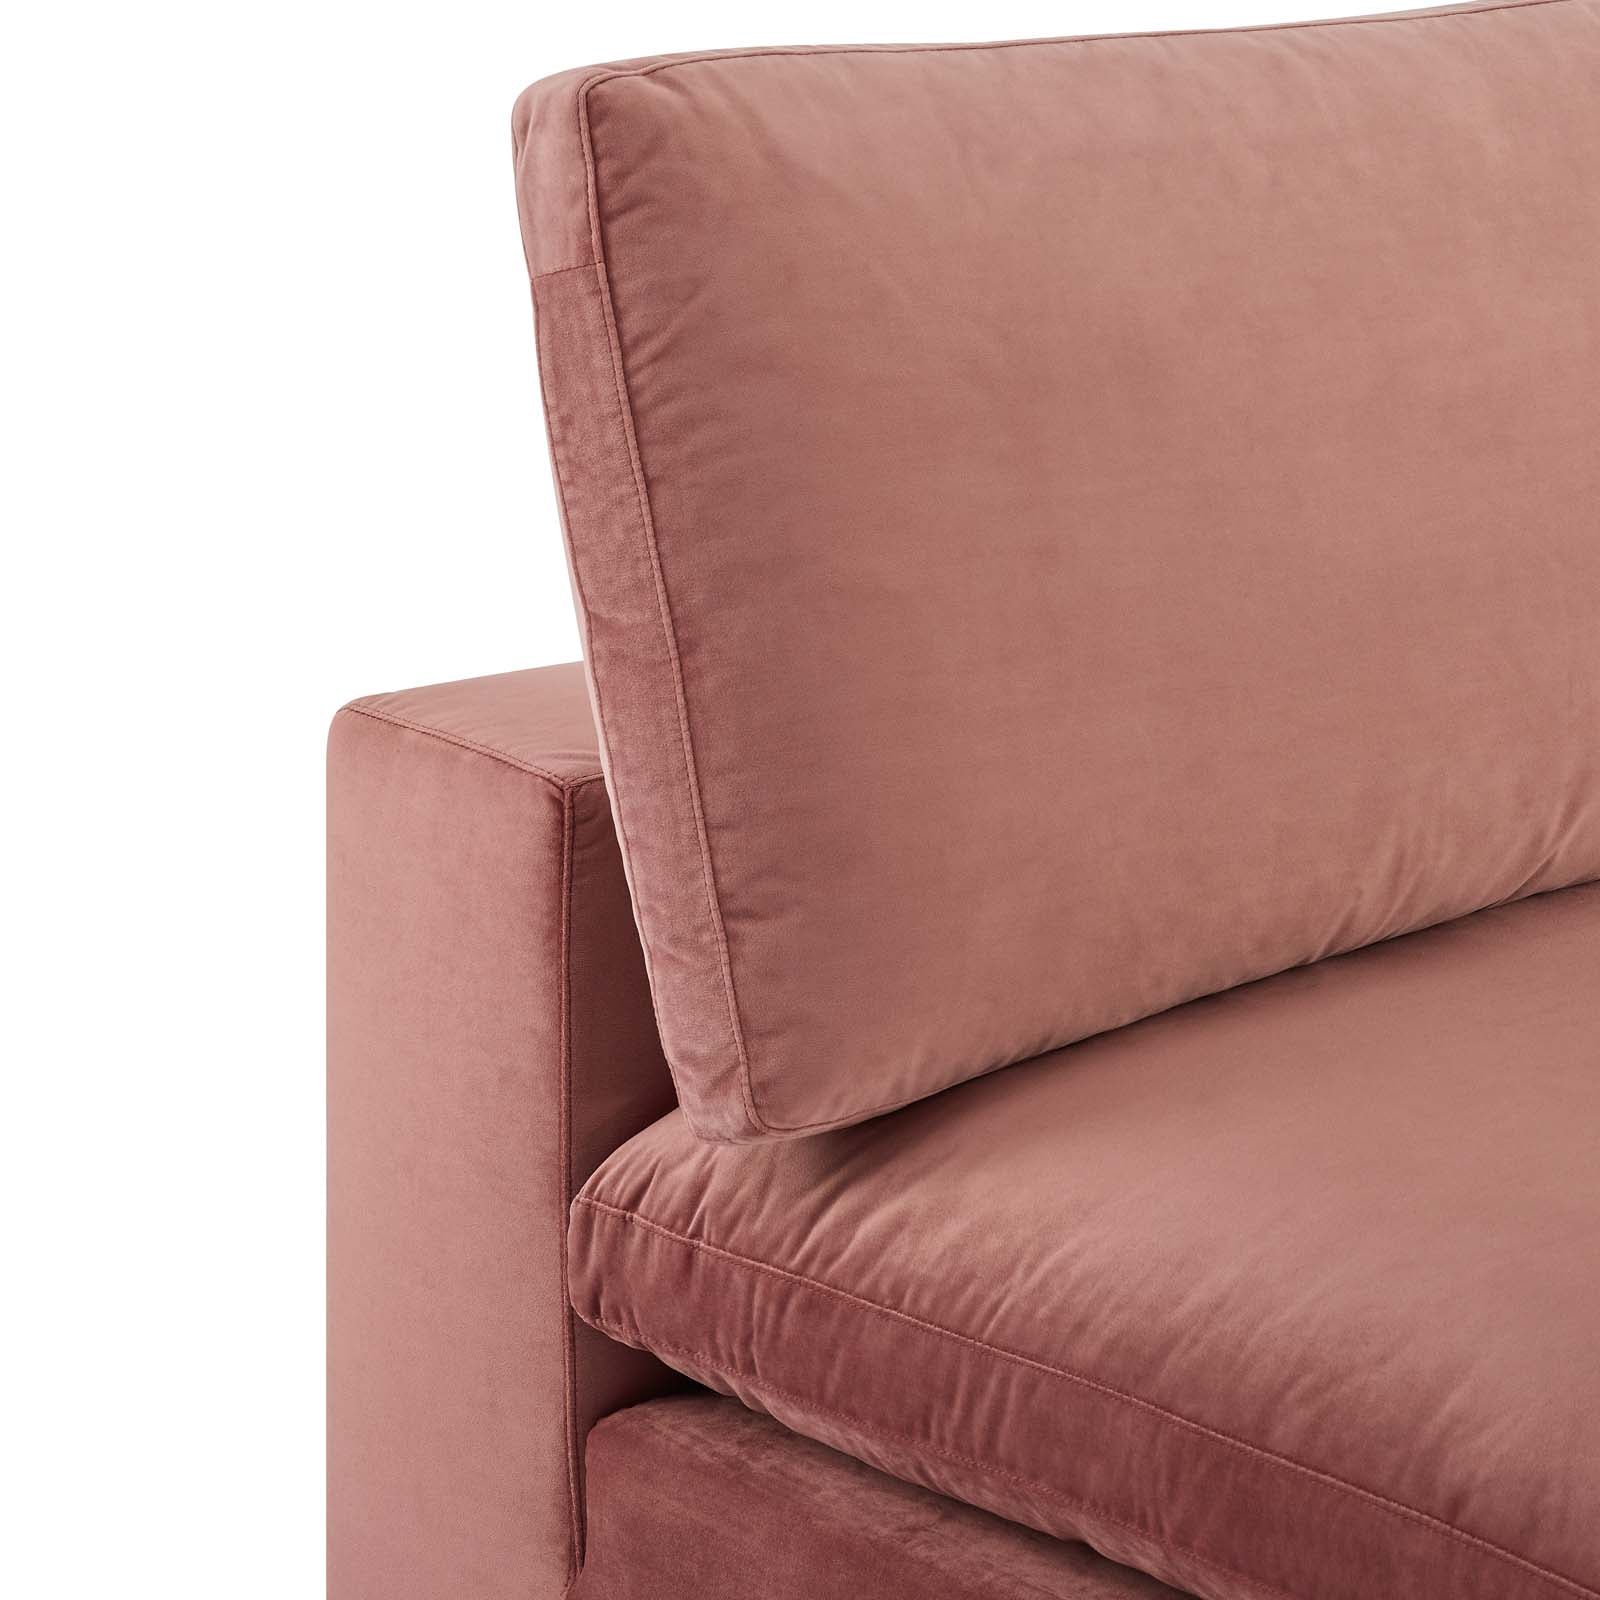 Modway Accent Chairs - Commix Down Filled Overstuffed Performance Velvet Armless Chair Dusty Rose